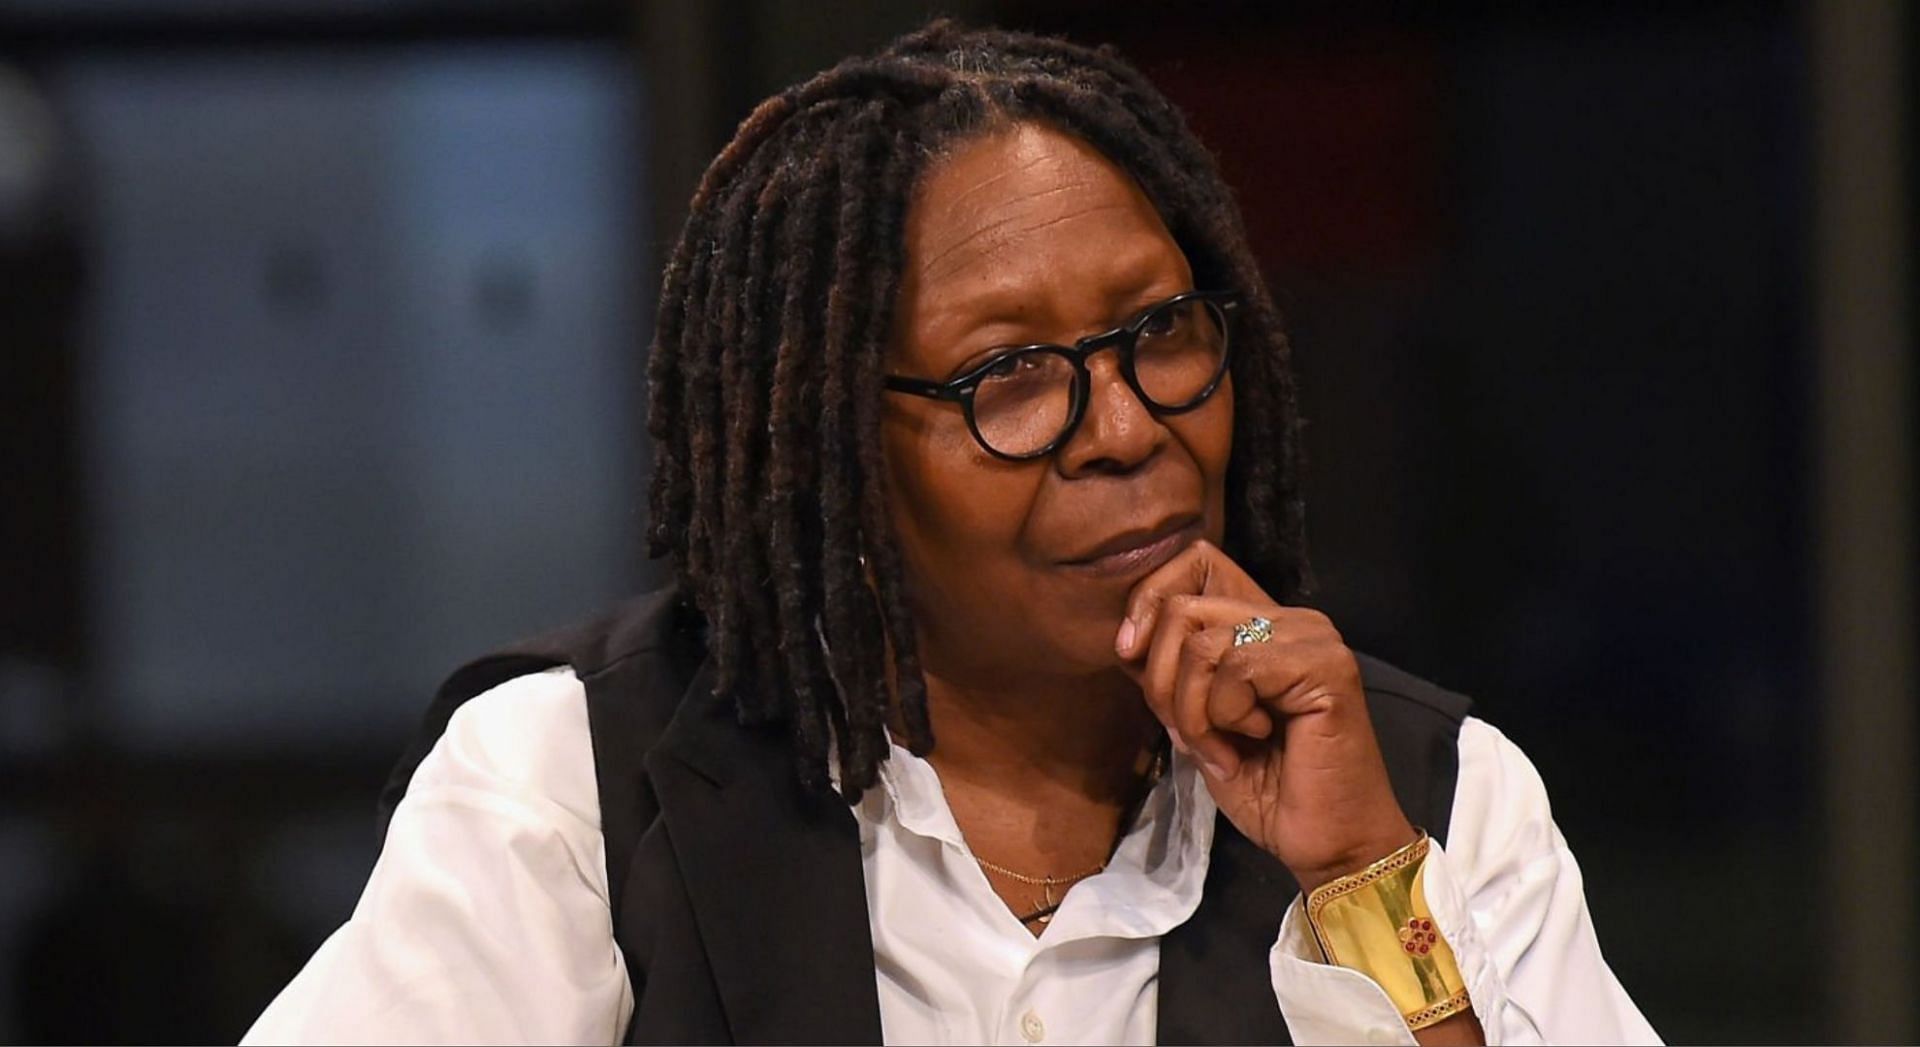 Whoopi Goldberg issued an apology for mistakenly using a racial slur on 